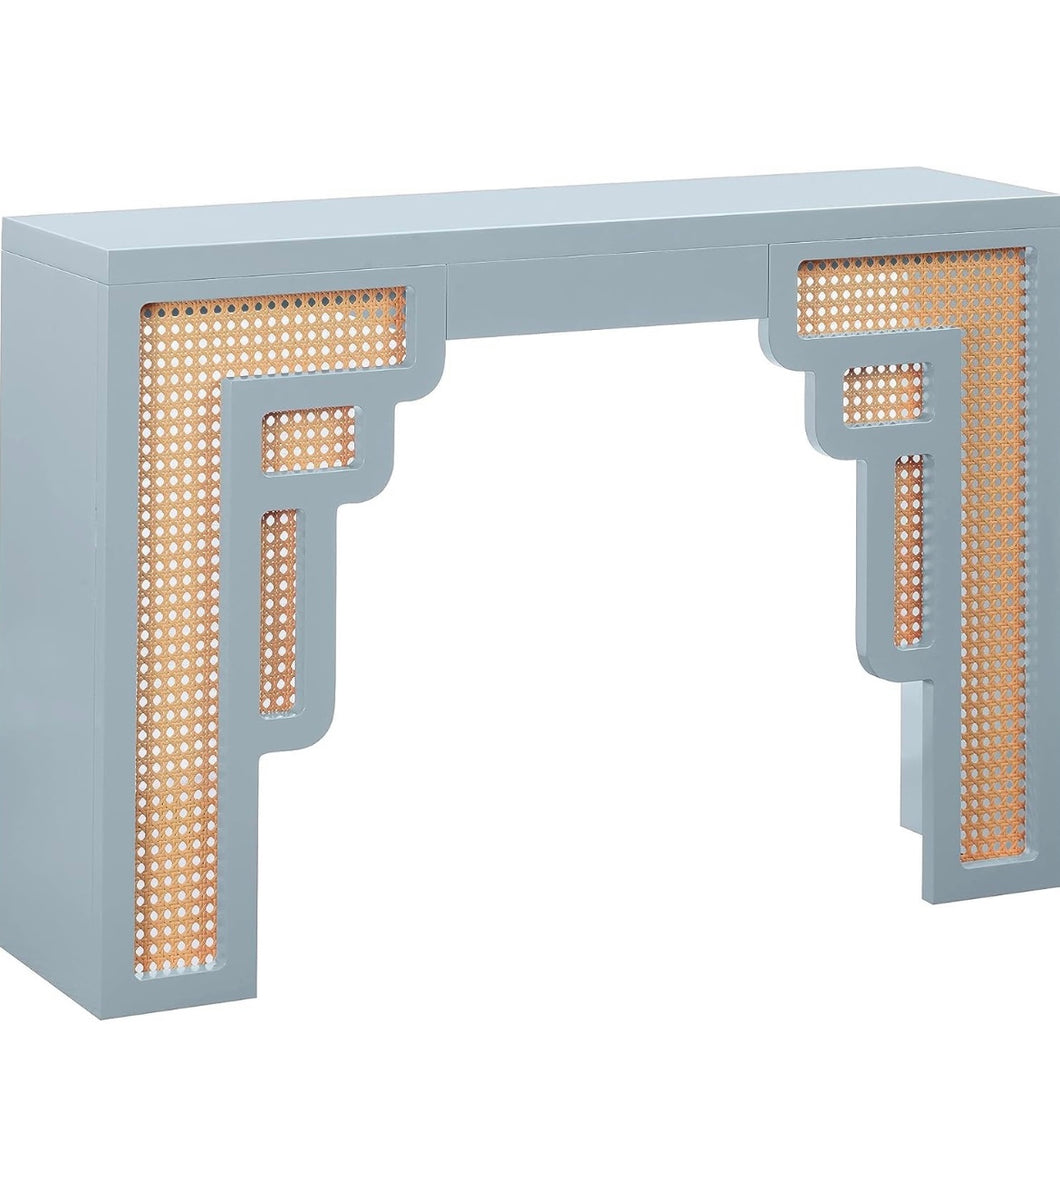 The Cane Console in Light Blue